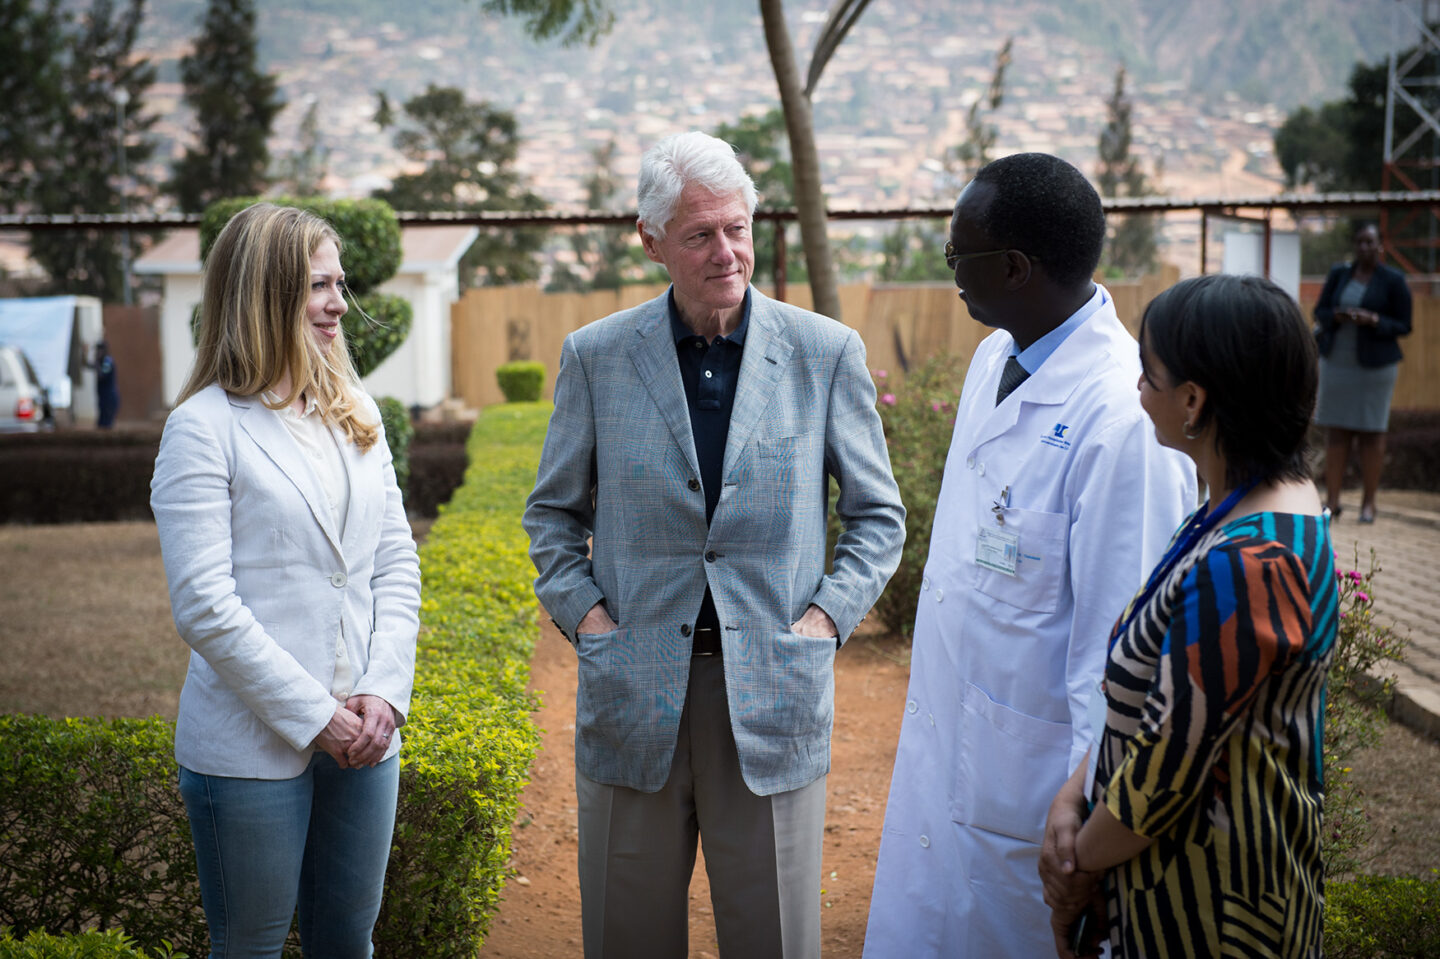 President Clinton and Chelsea Clinton speak with staff at a hospital in Kigali, Rwanda